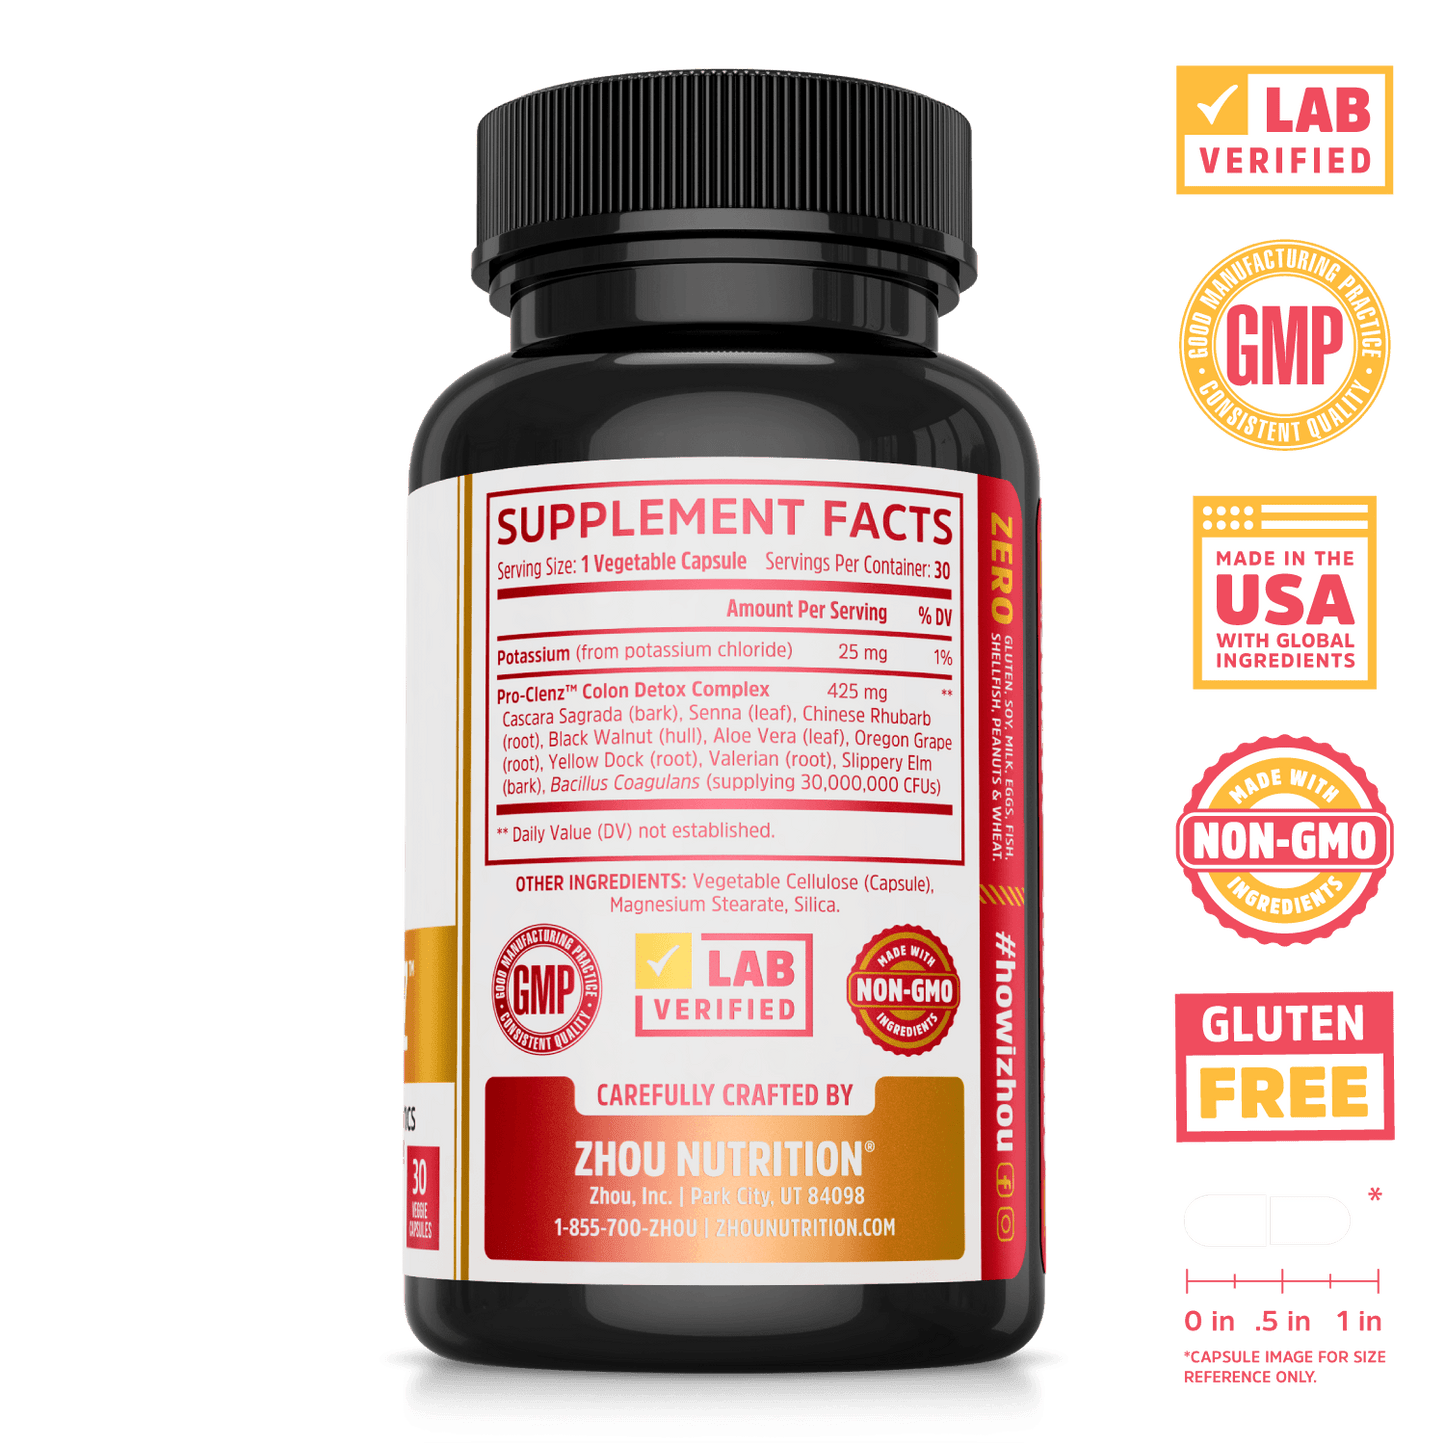 Zhou Nutrition Pro-Clenz Colon Detox Complex with Probiotics. Lab verified, good manufacturing practices, made in the USA with global ingredients, made with non-GMO ingredients, gluten free.